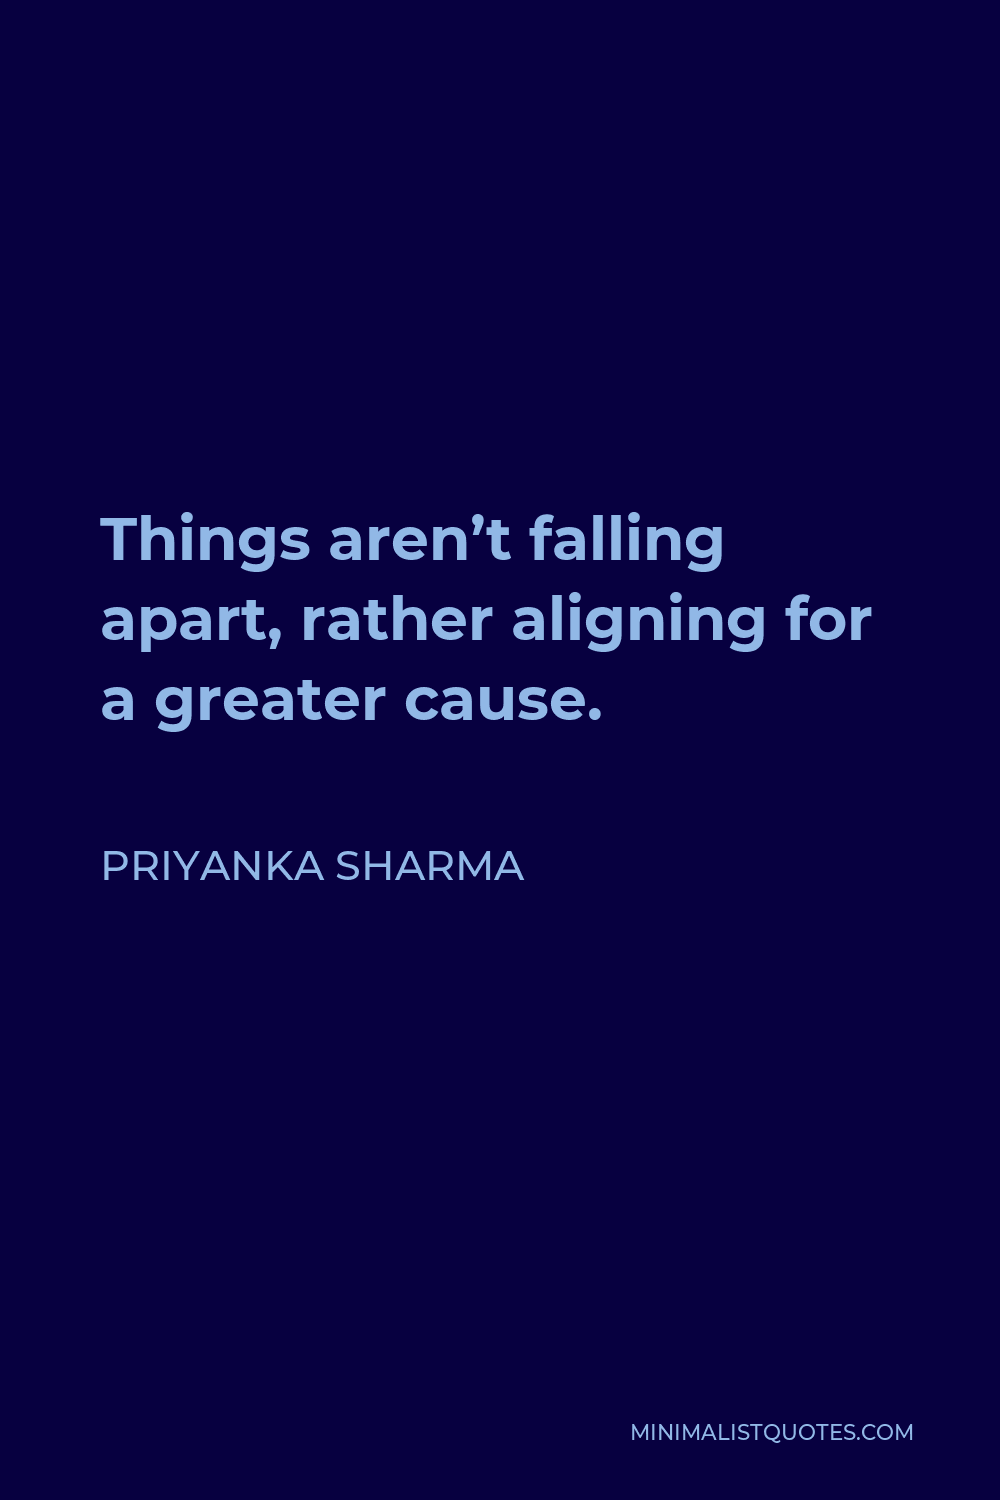 Priyanka Sharma Quote - Things aren’t falling apart, rather aligning for a greater cause.